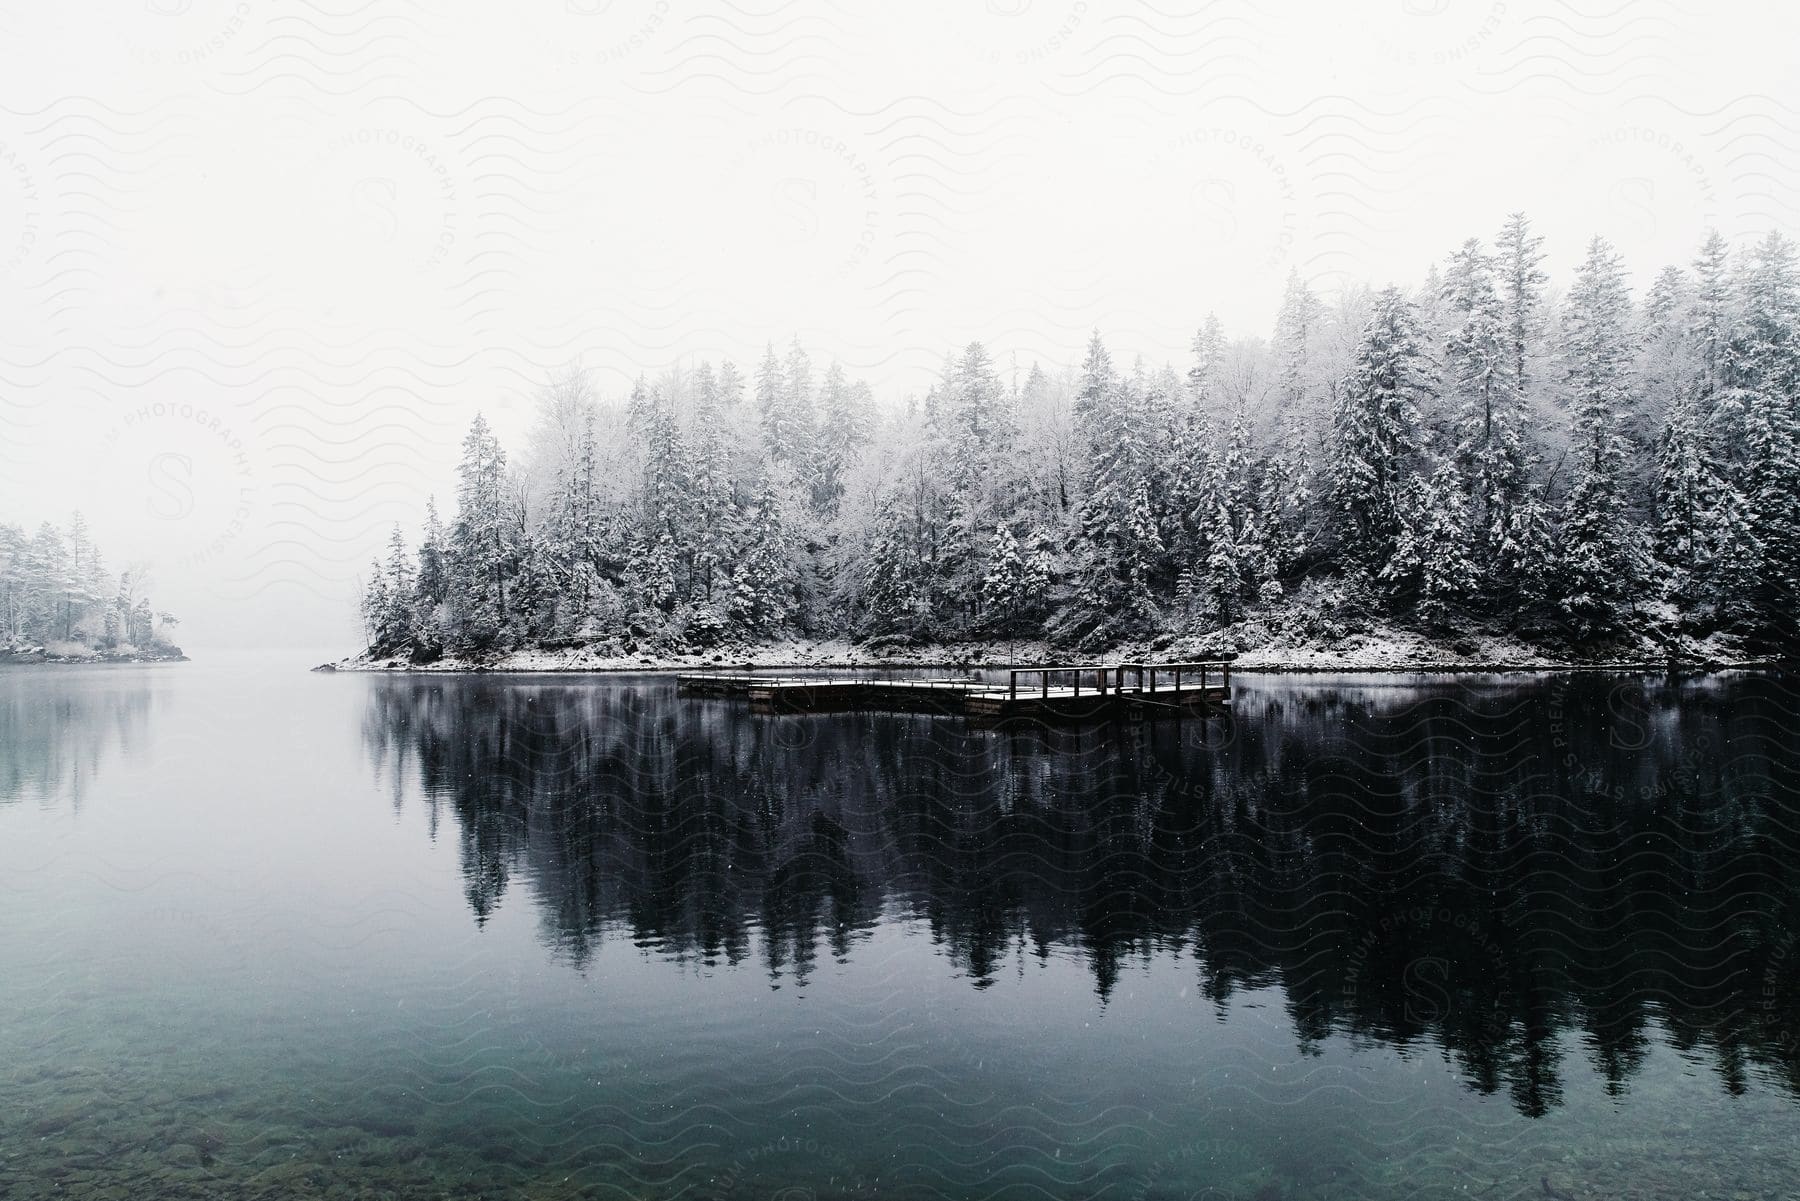 A snowcovered forest along the coast reflects on the water around a dock under a white winter sky